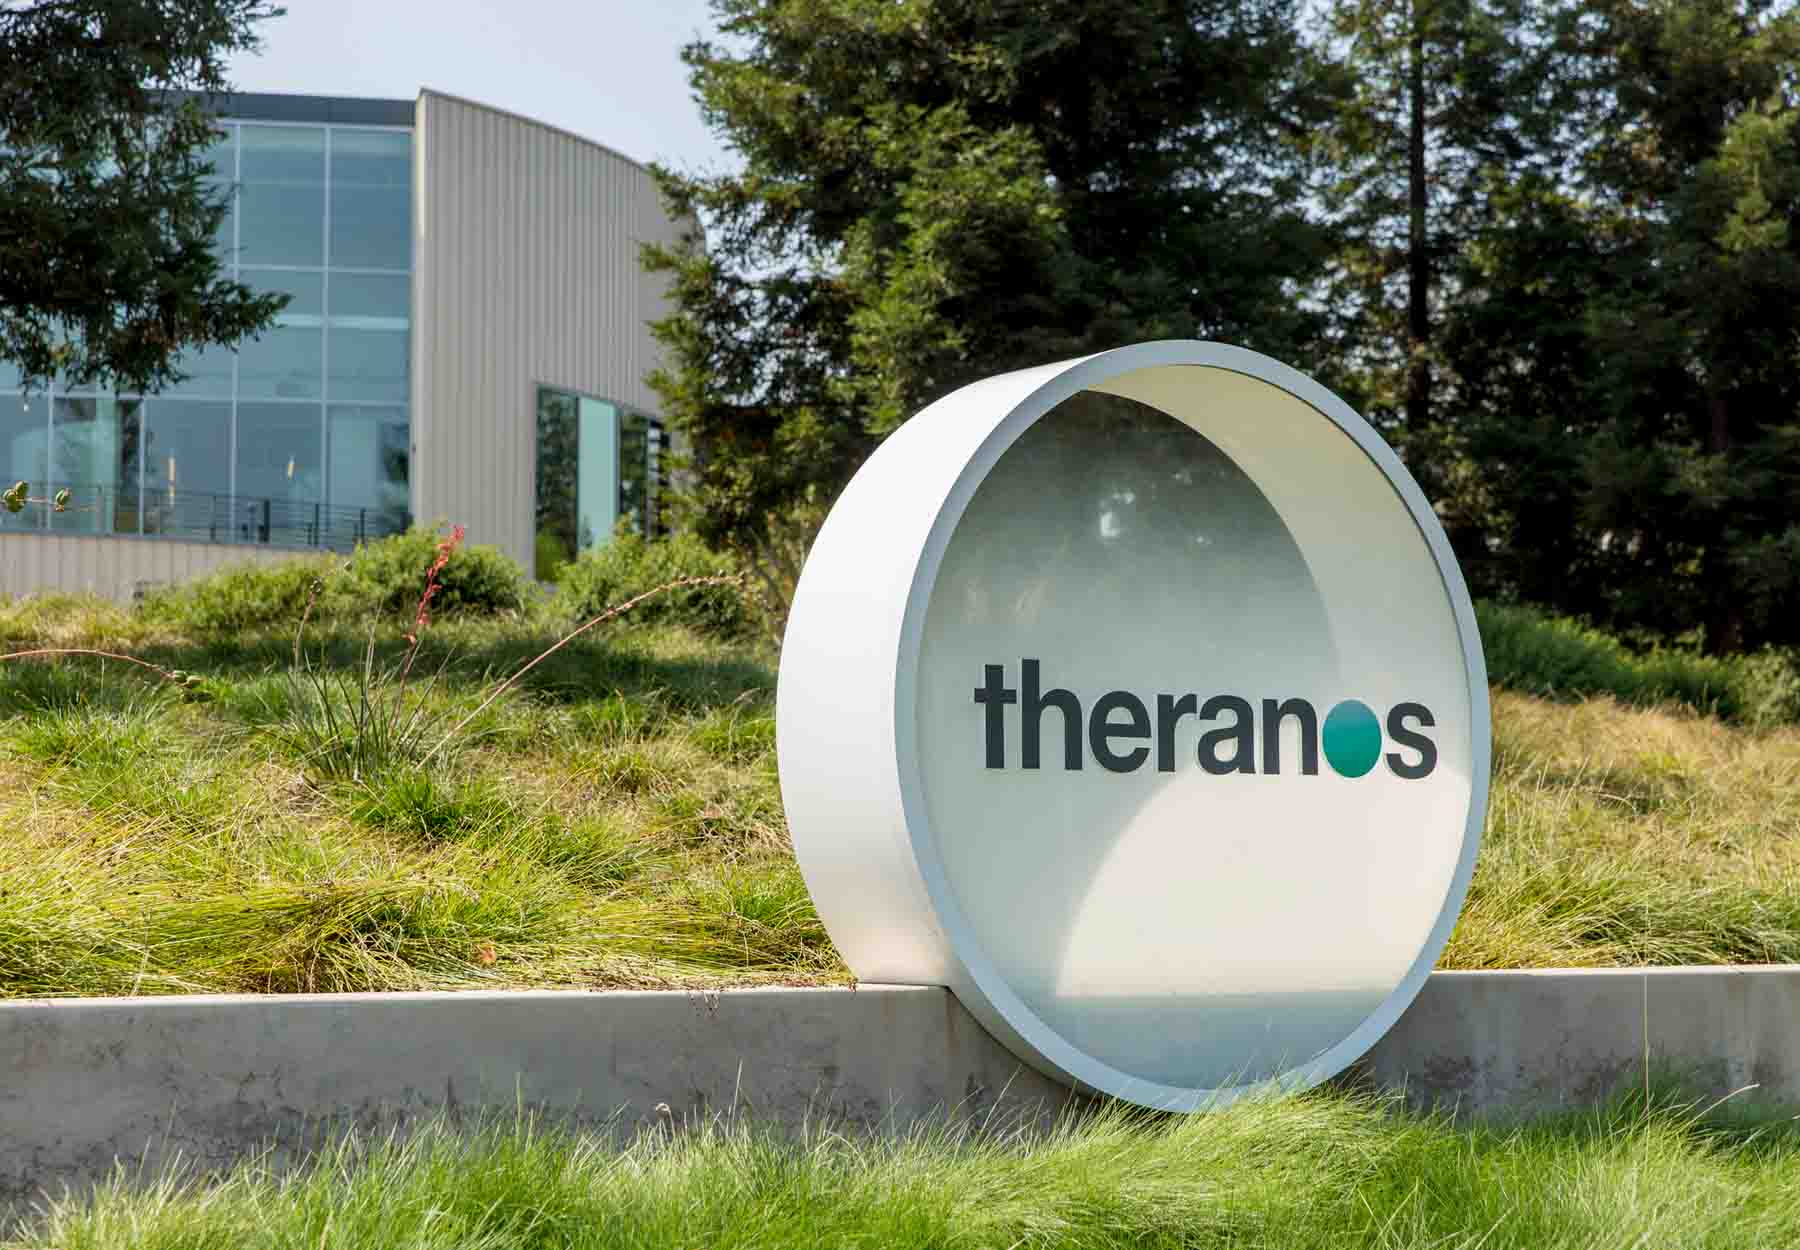 The Theranos sign in front of the company's building